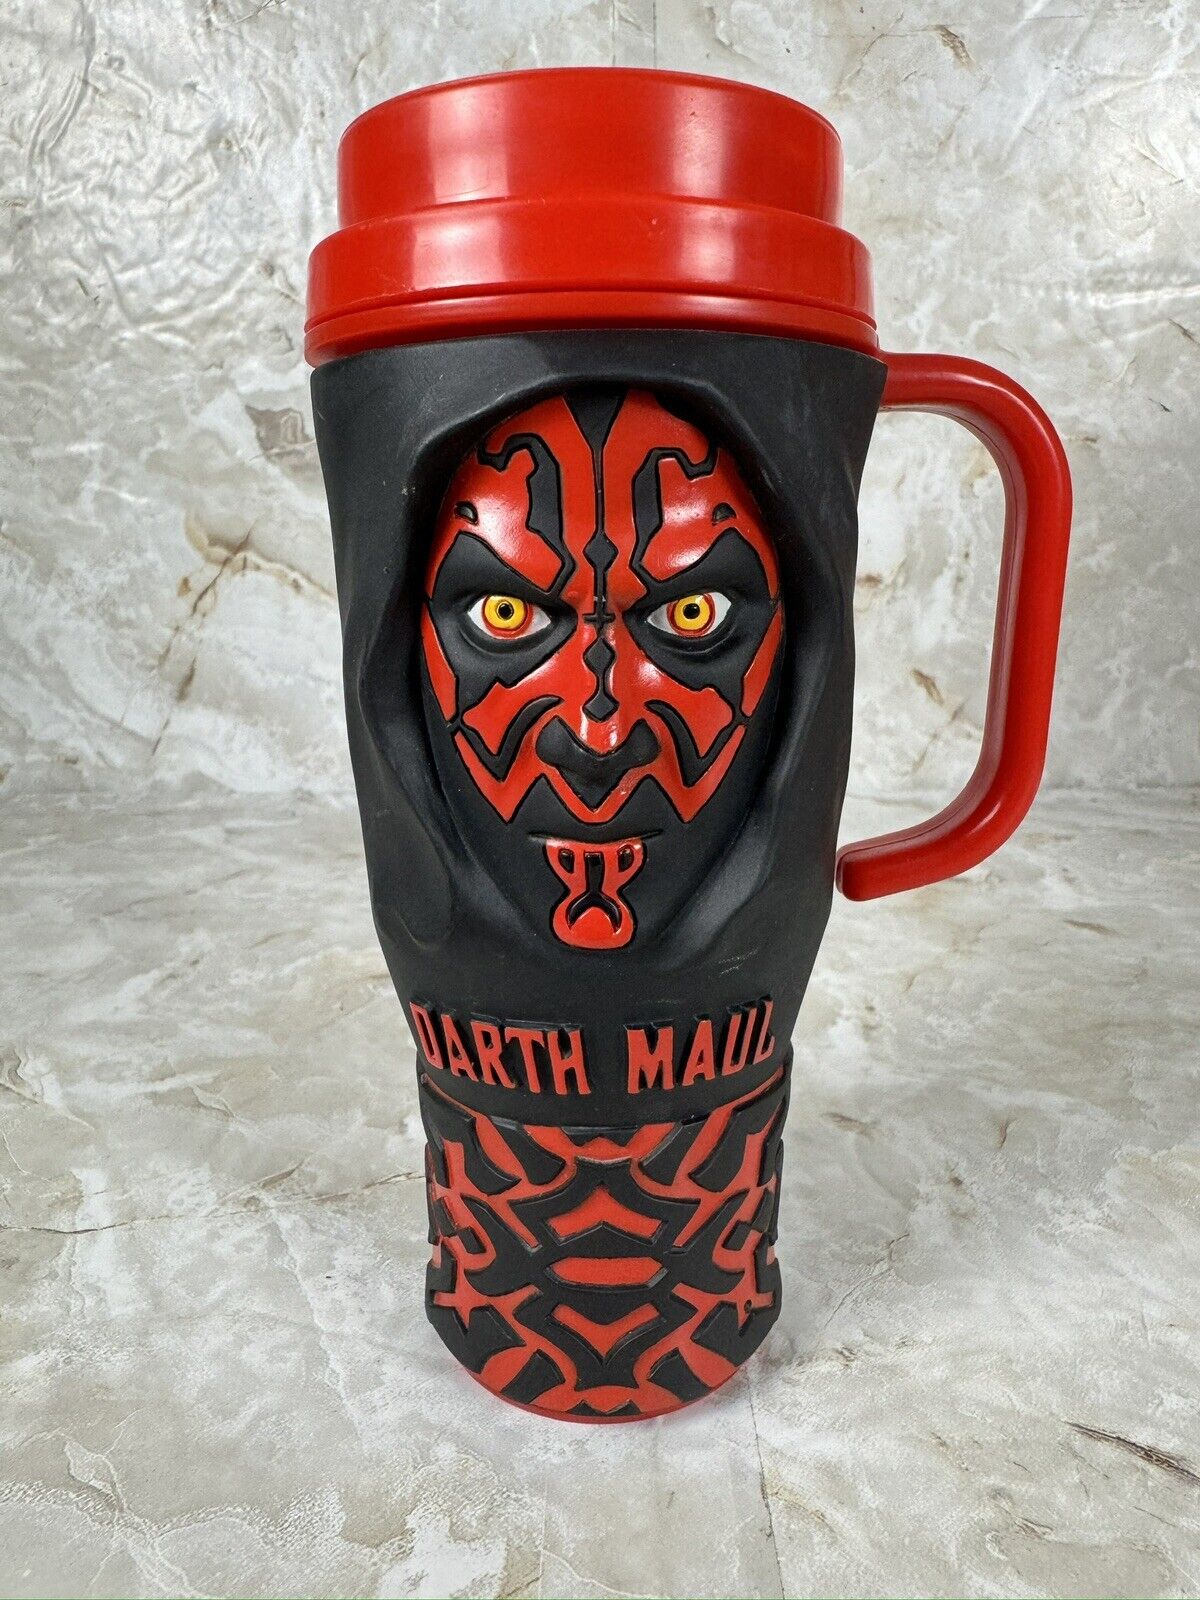 Vintage STAR WARS  Episode 1 DARTH MAUL 3D Travel Mug Cup By Applause 1999 